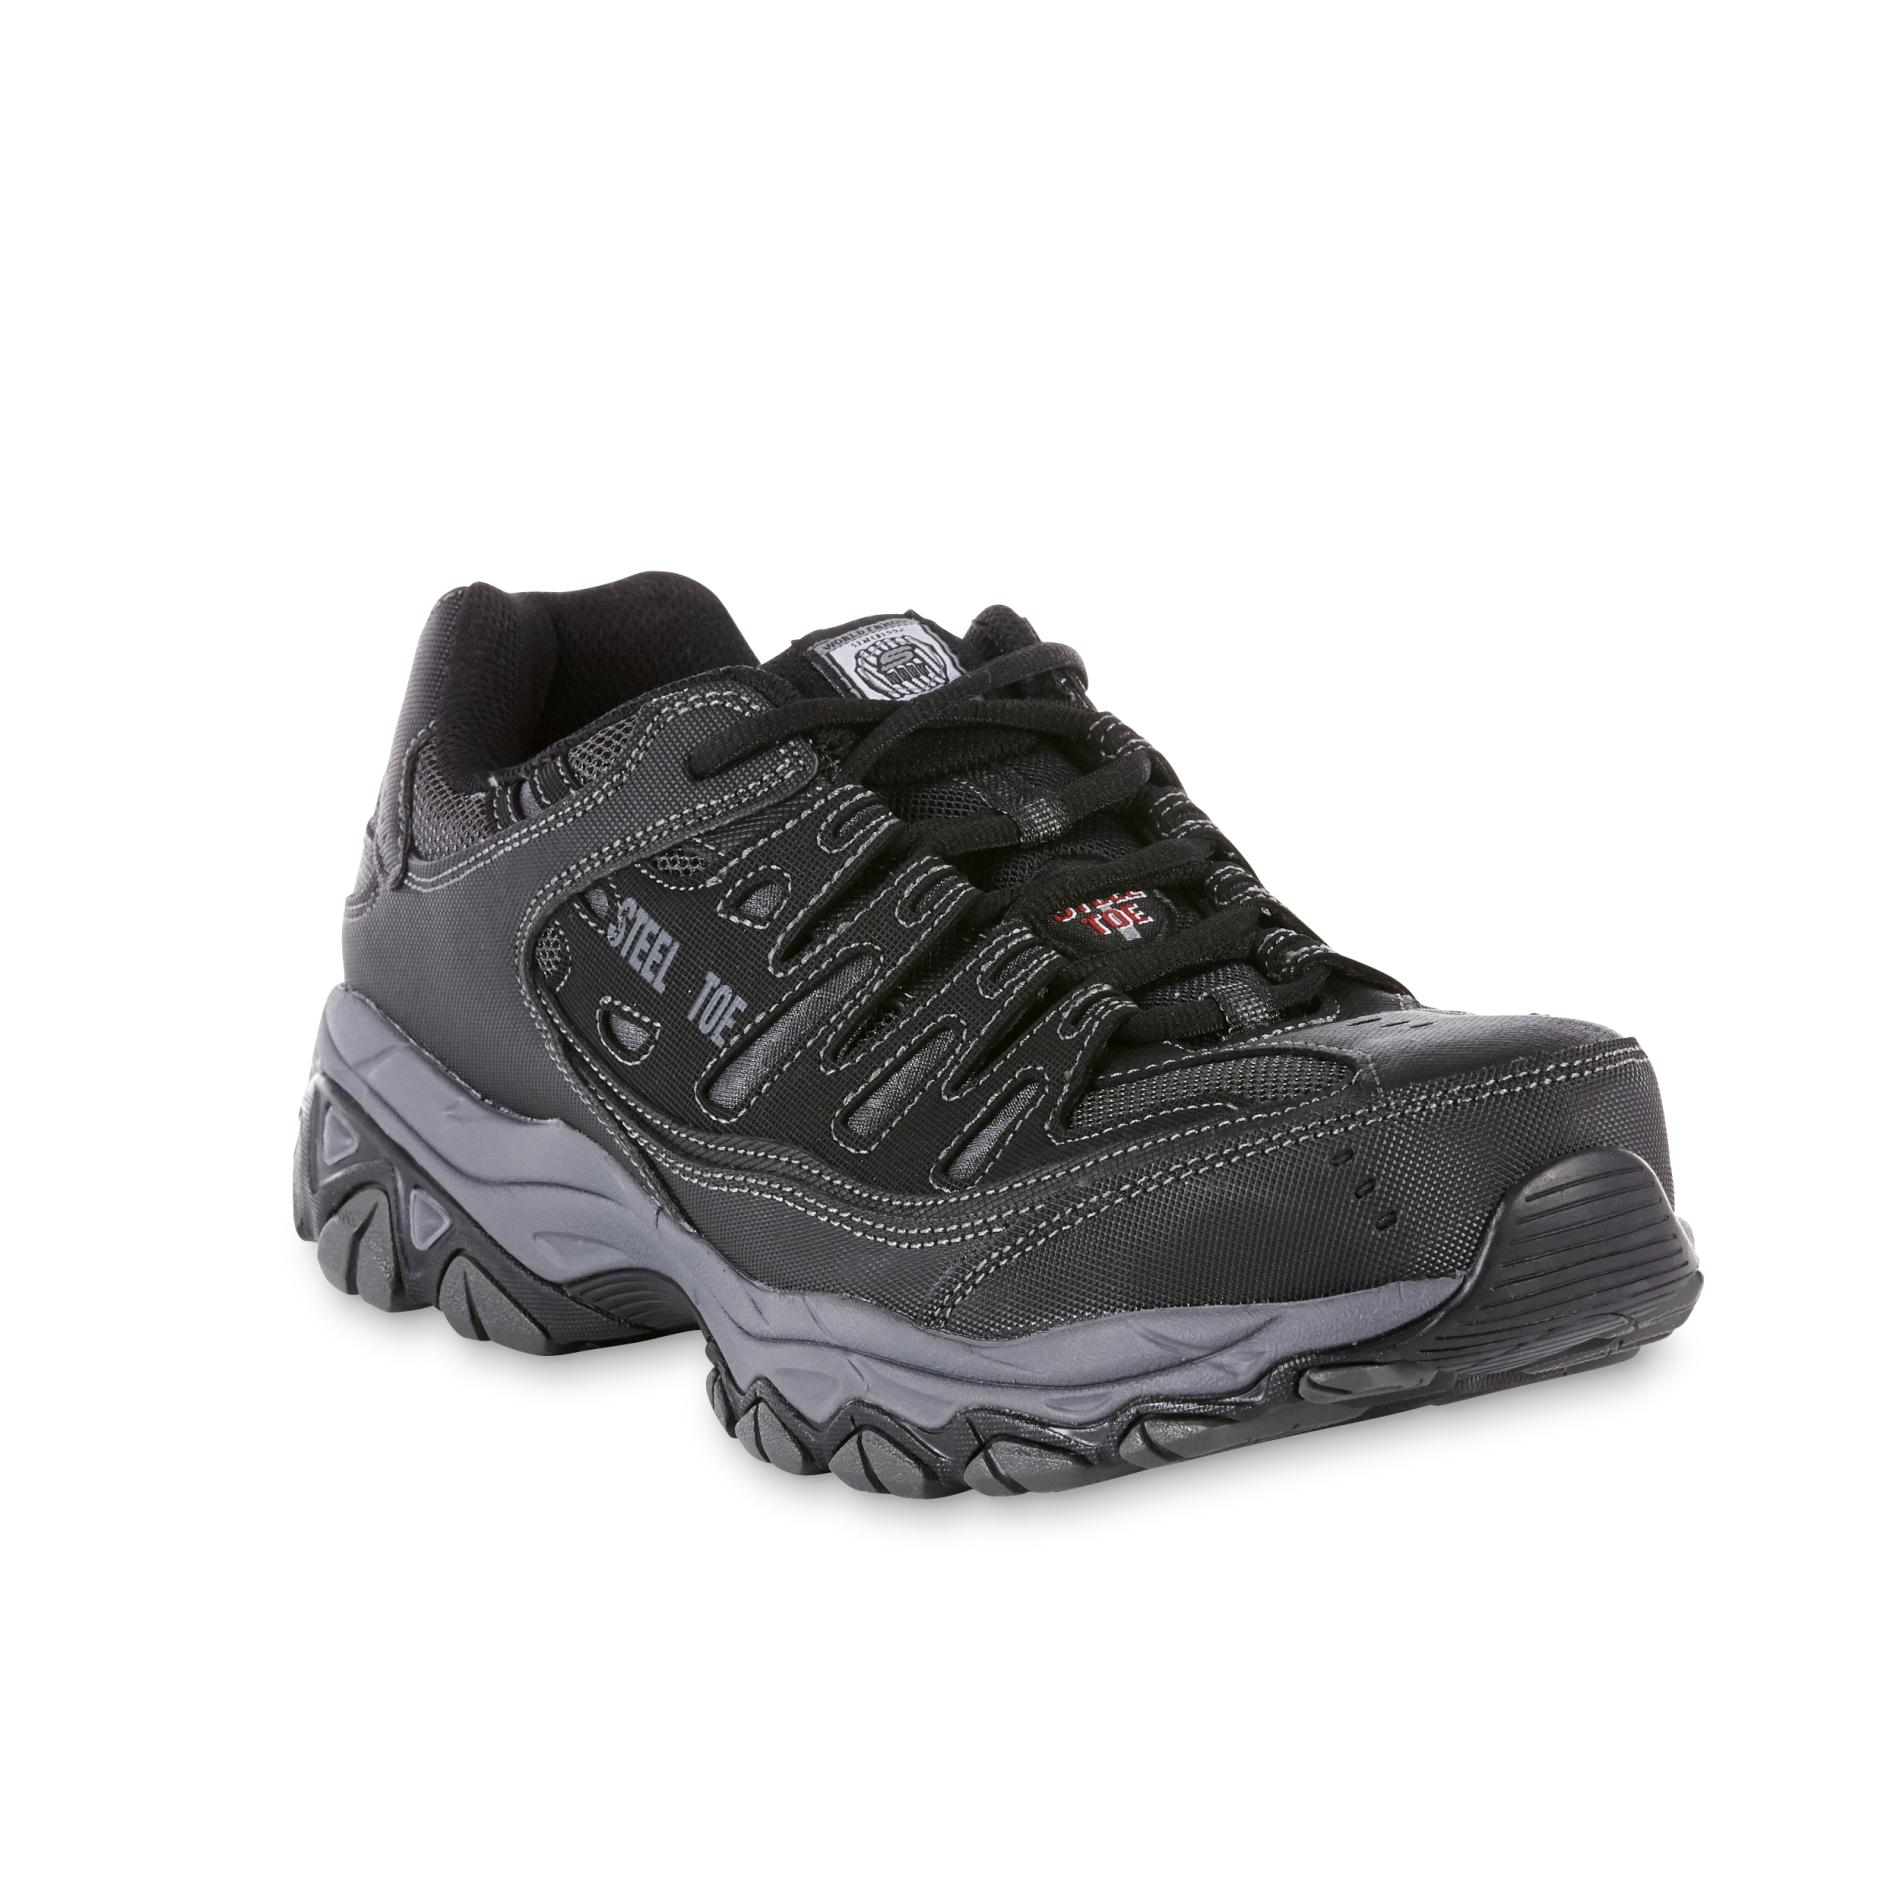 Universidad descanso tsunami Skechers Work Men's Cankton Relaxed Fit Steel Toe Athletic Work Shoe -  Black/Charcoal